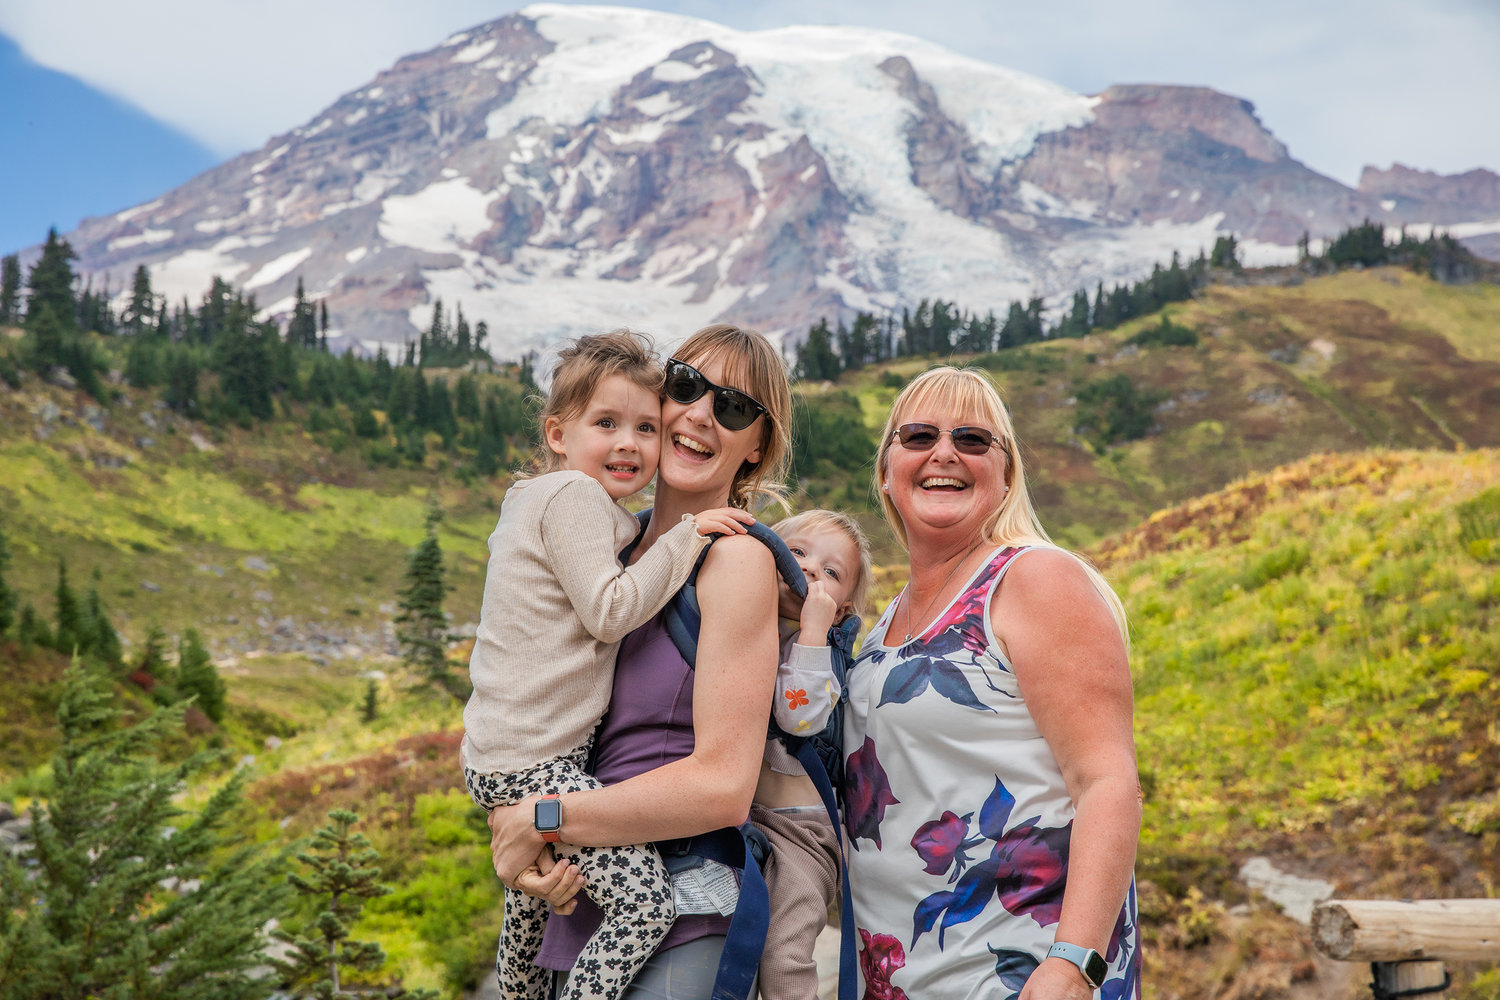 Visitors smile while posing for a photo in Paradise at Mount Rainier on Wednesday near Ashford.